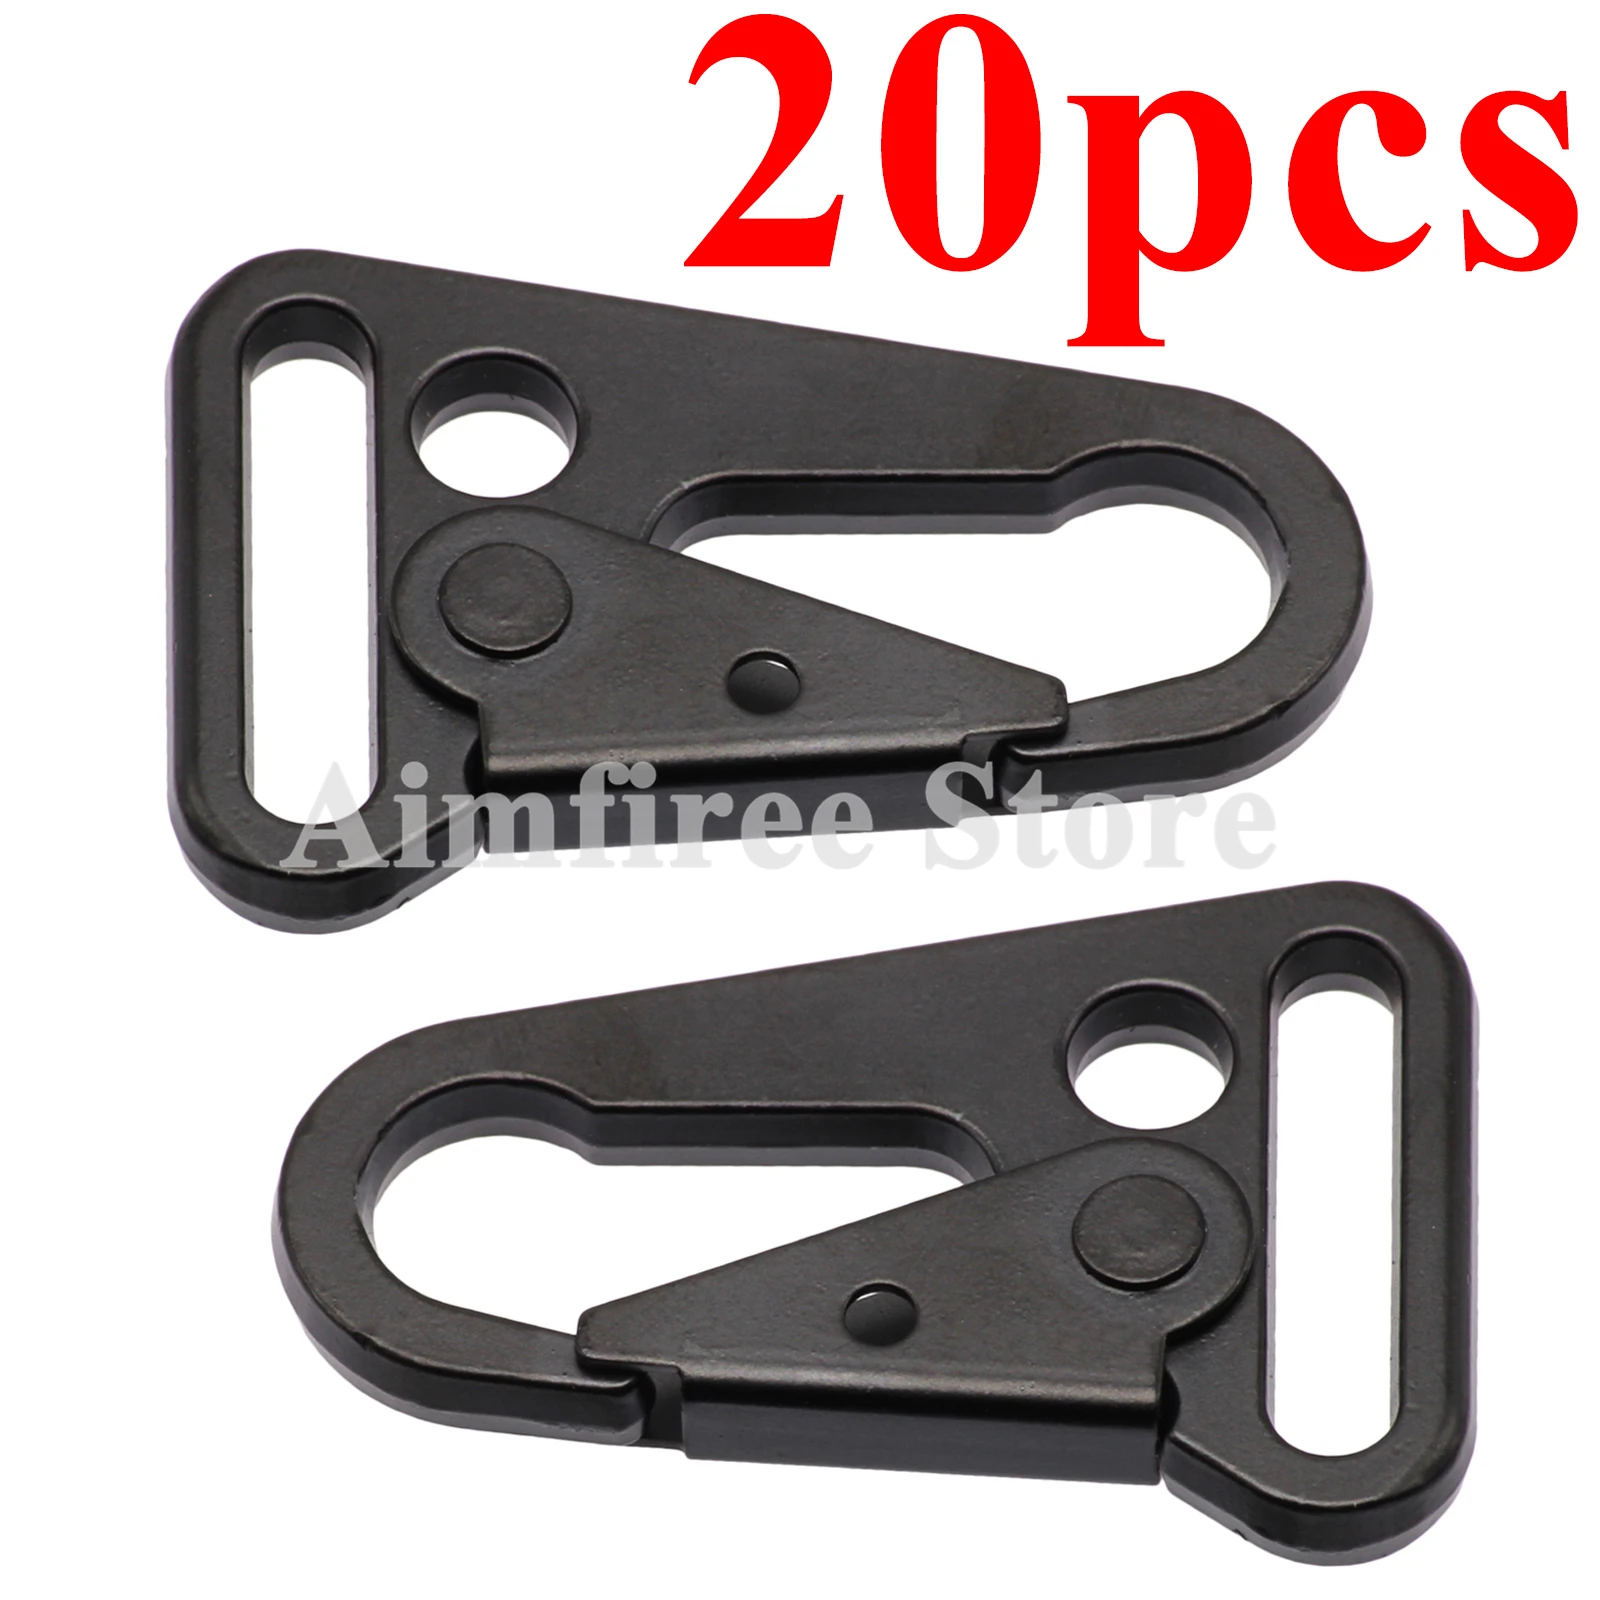 

20Pcs HK Type Sling Snap Hook Clips 1" Inch Rifle Strap Gun Attachment Carabiner Buckle Hook